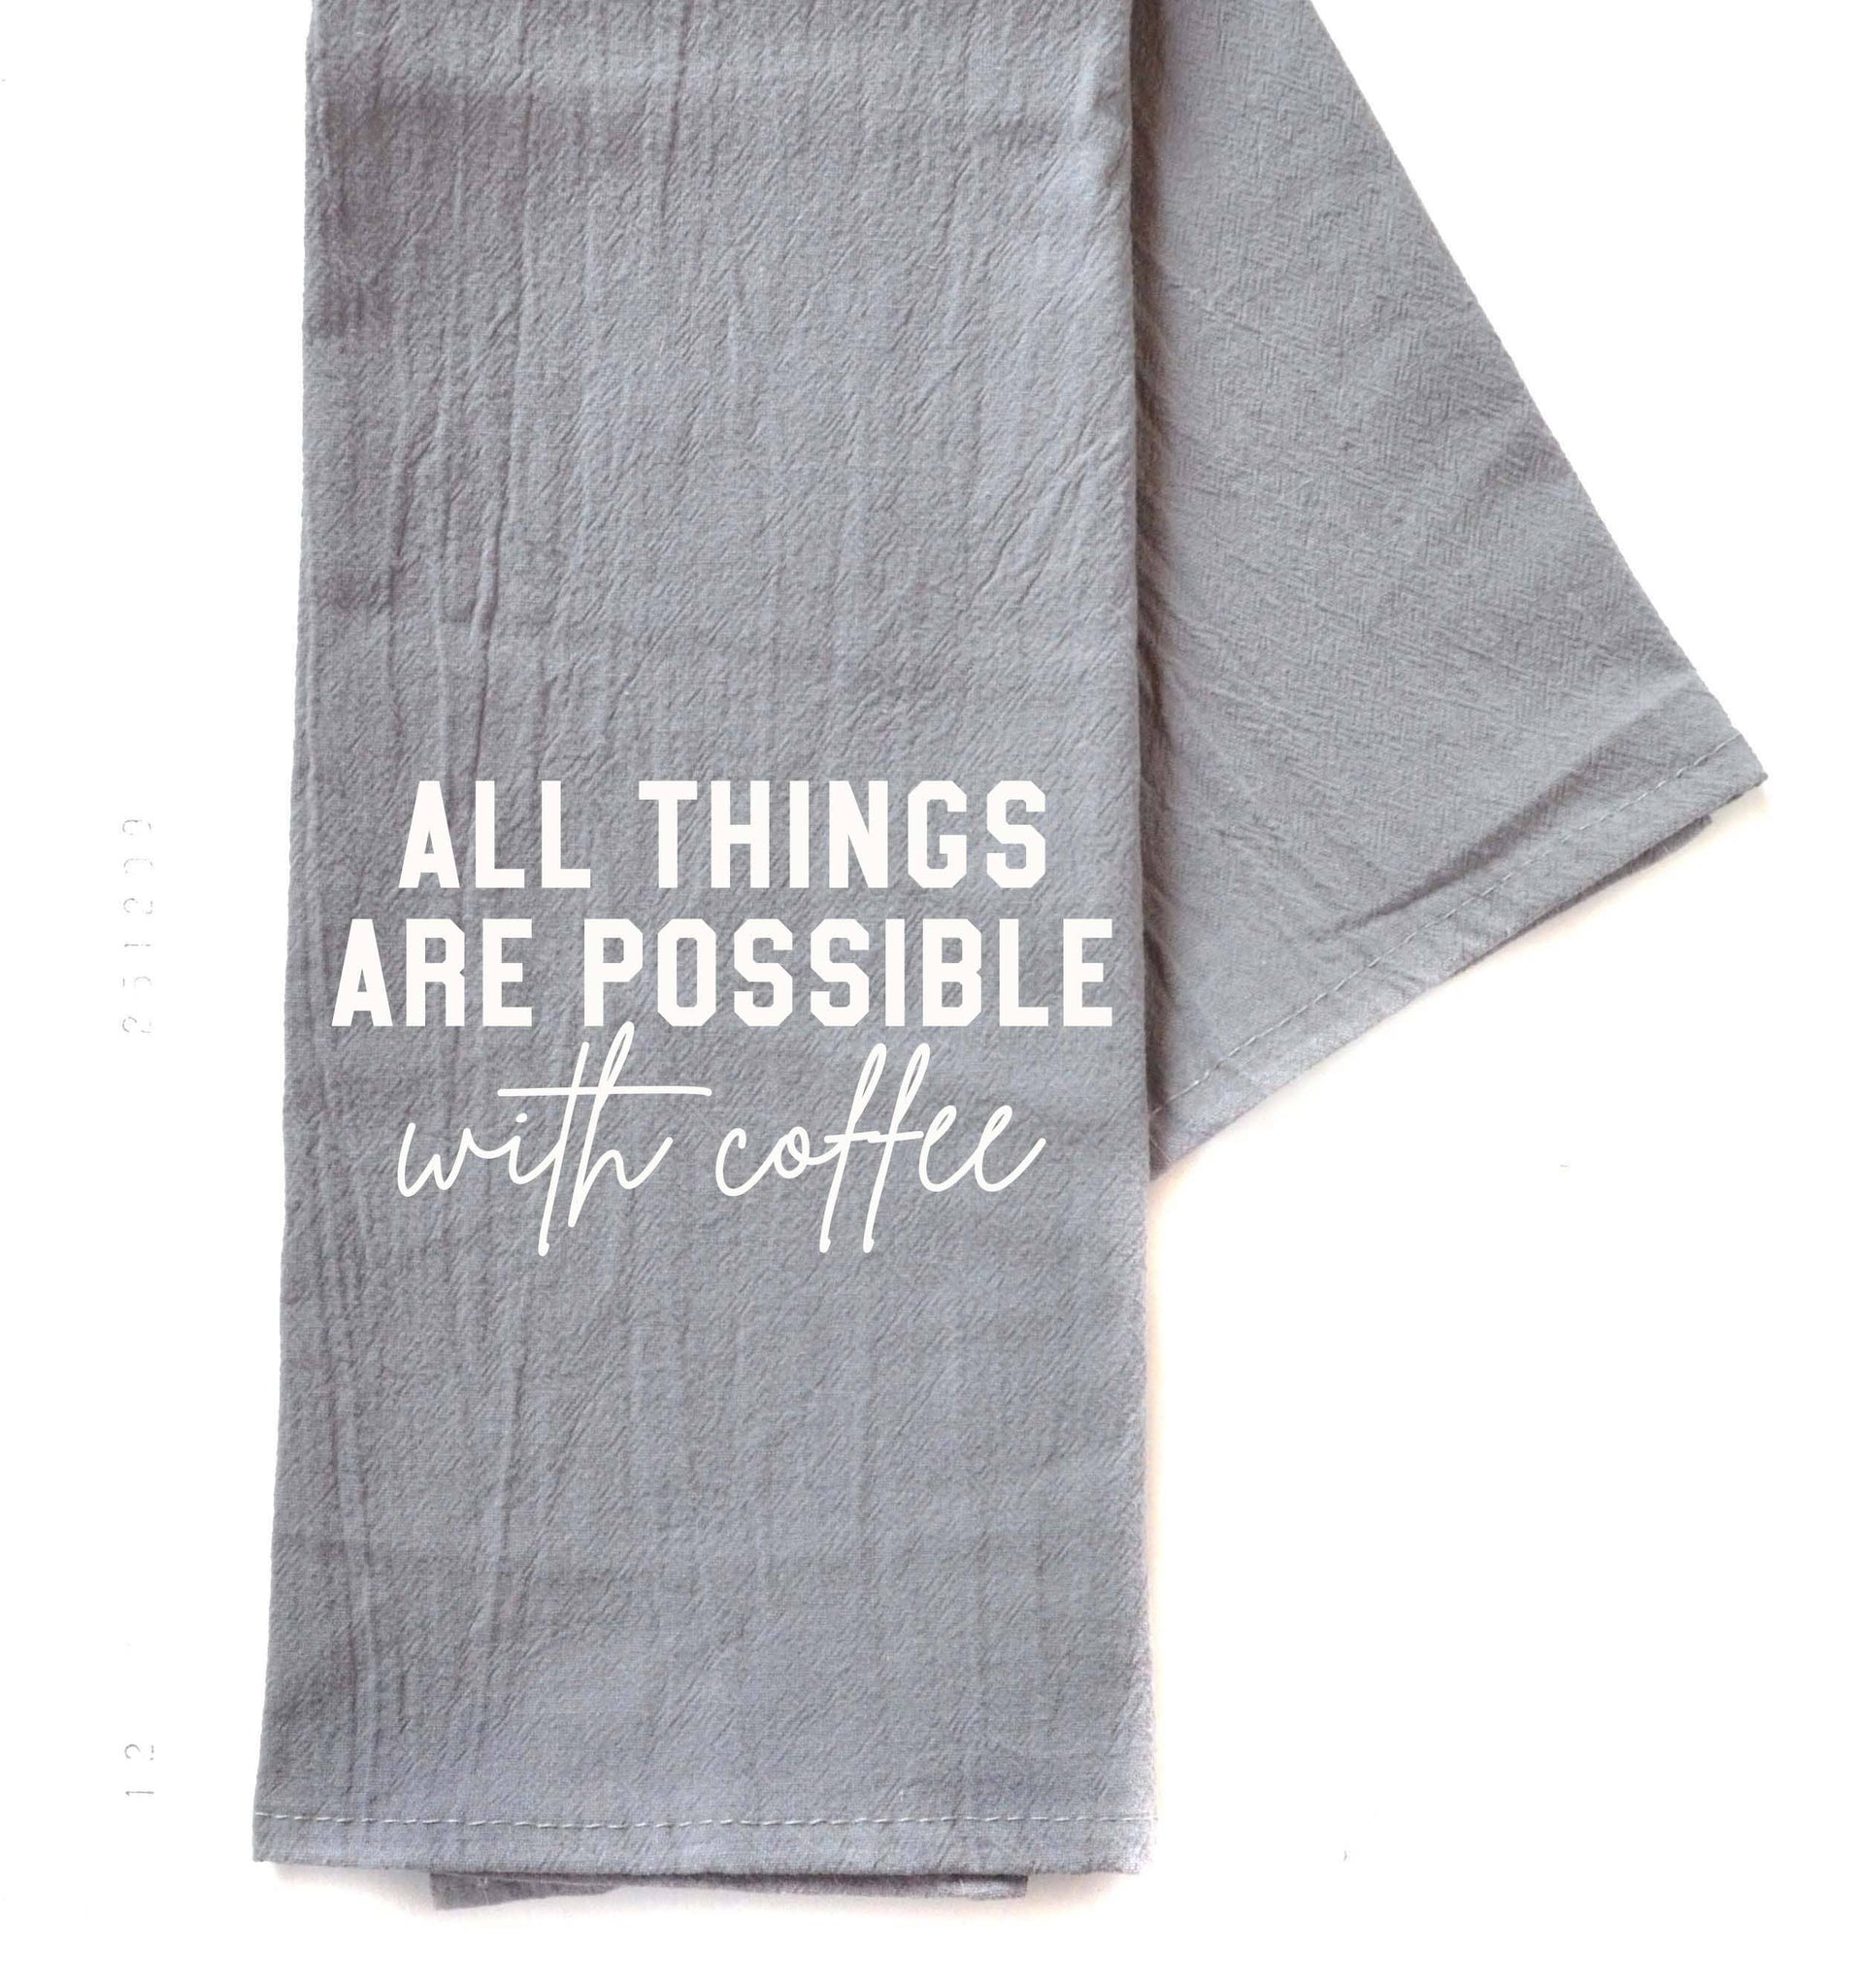 Driftless Studios - All Things Are Possible with Coffee - Gray Hand Towel